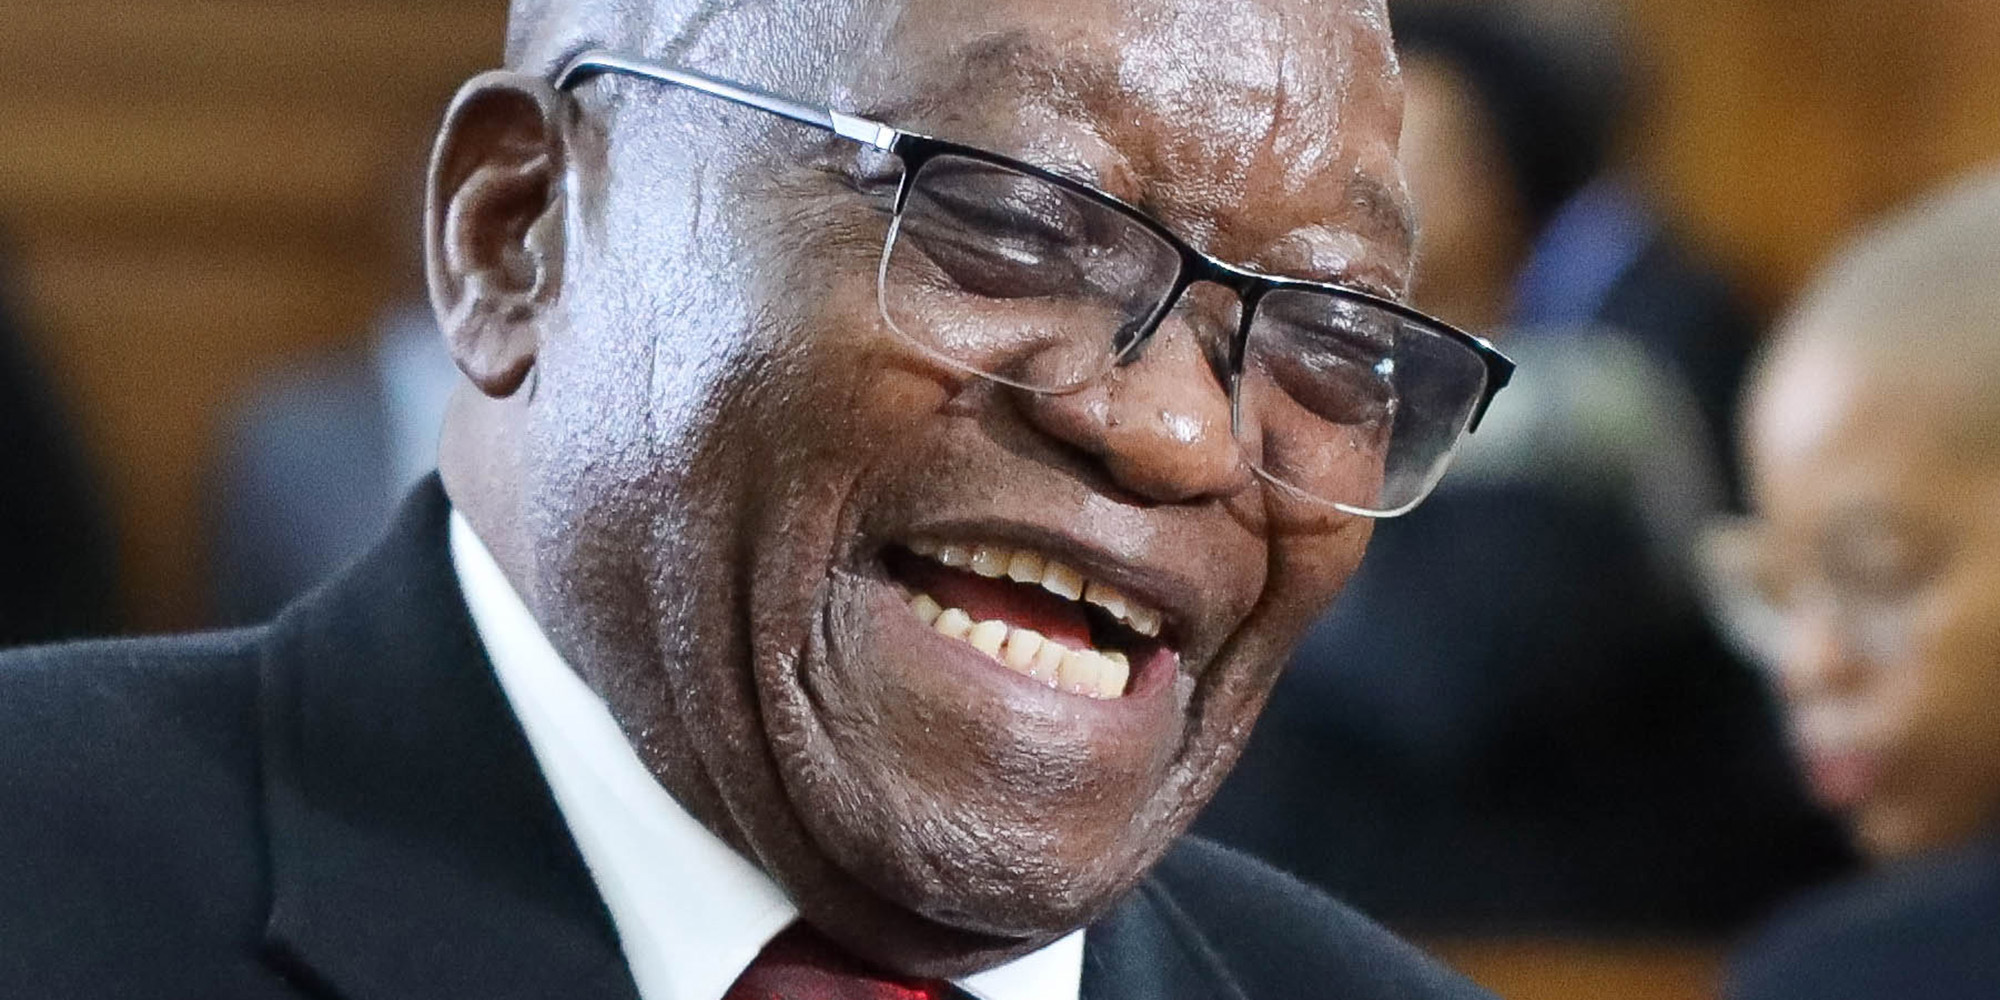 South Africa's Zuma granted remission, avoids return to jail